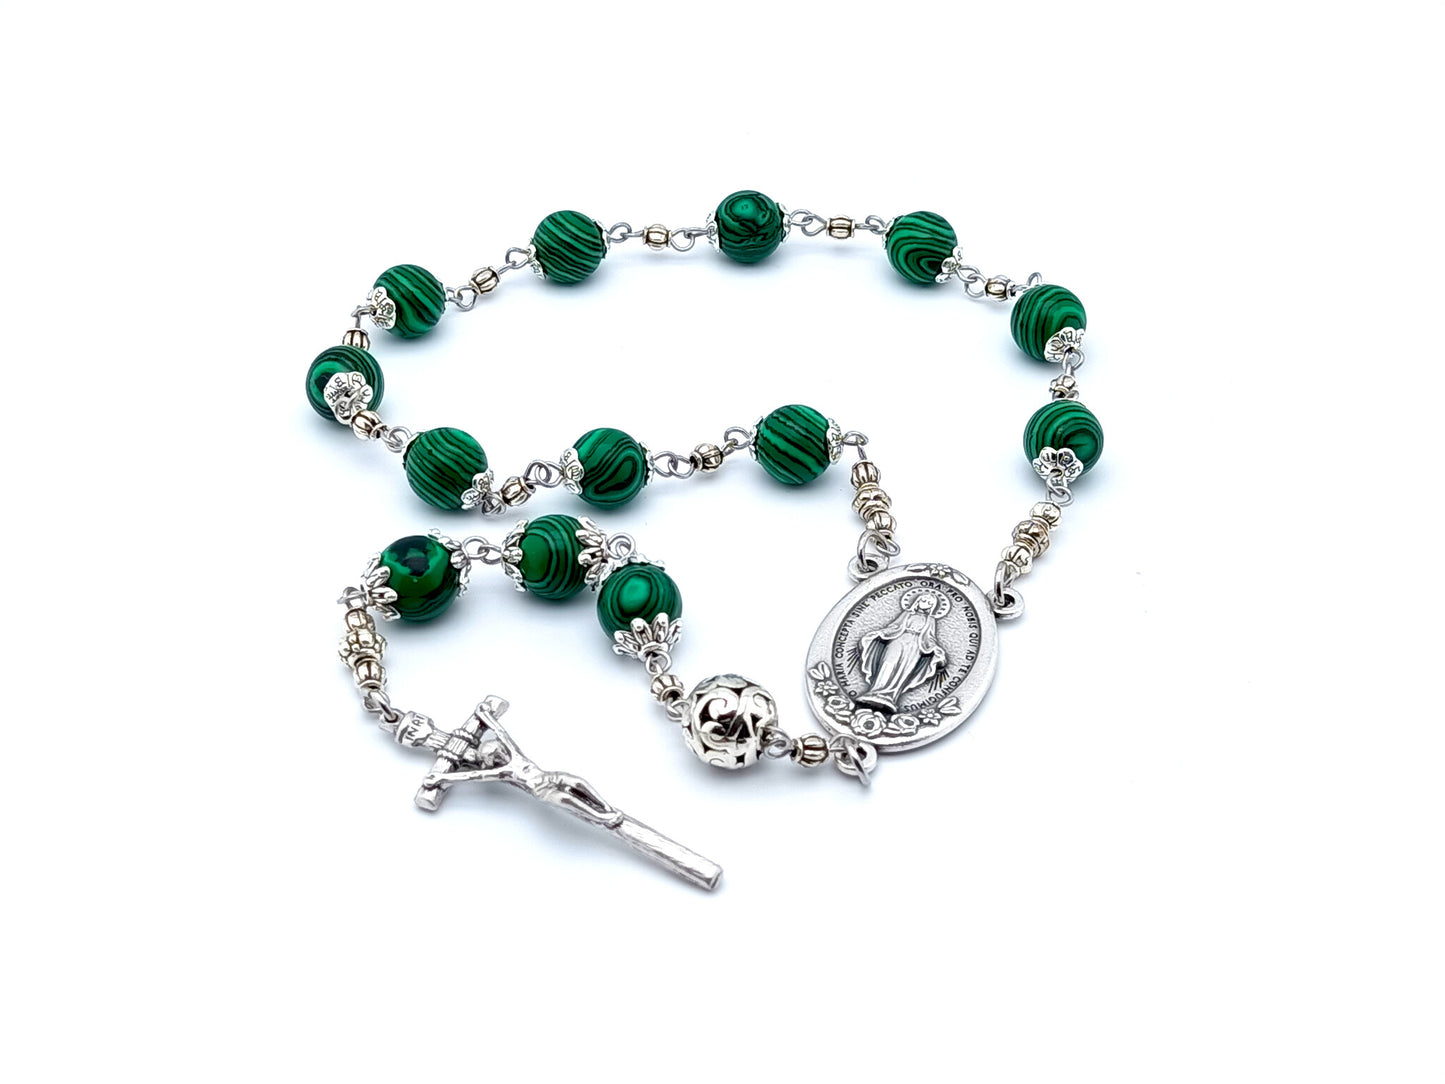 Miraculous Medal single decade rosary in malachite gemstone and silver.